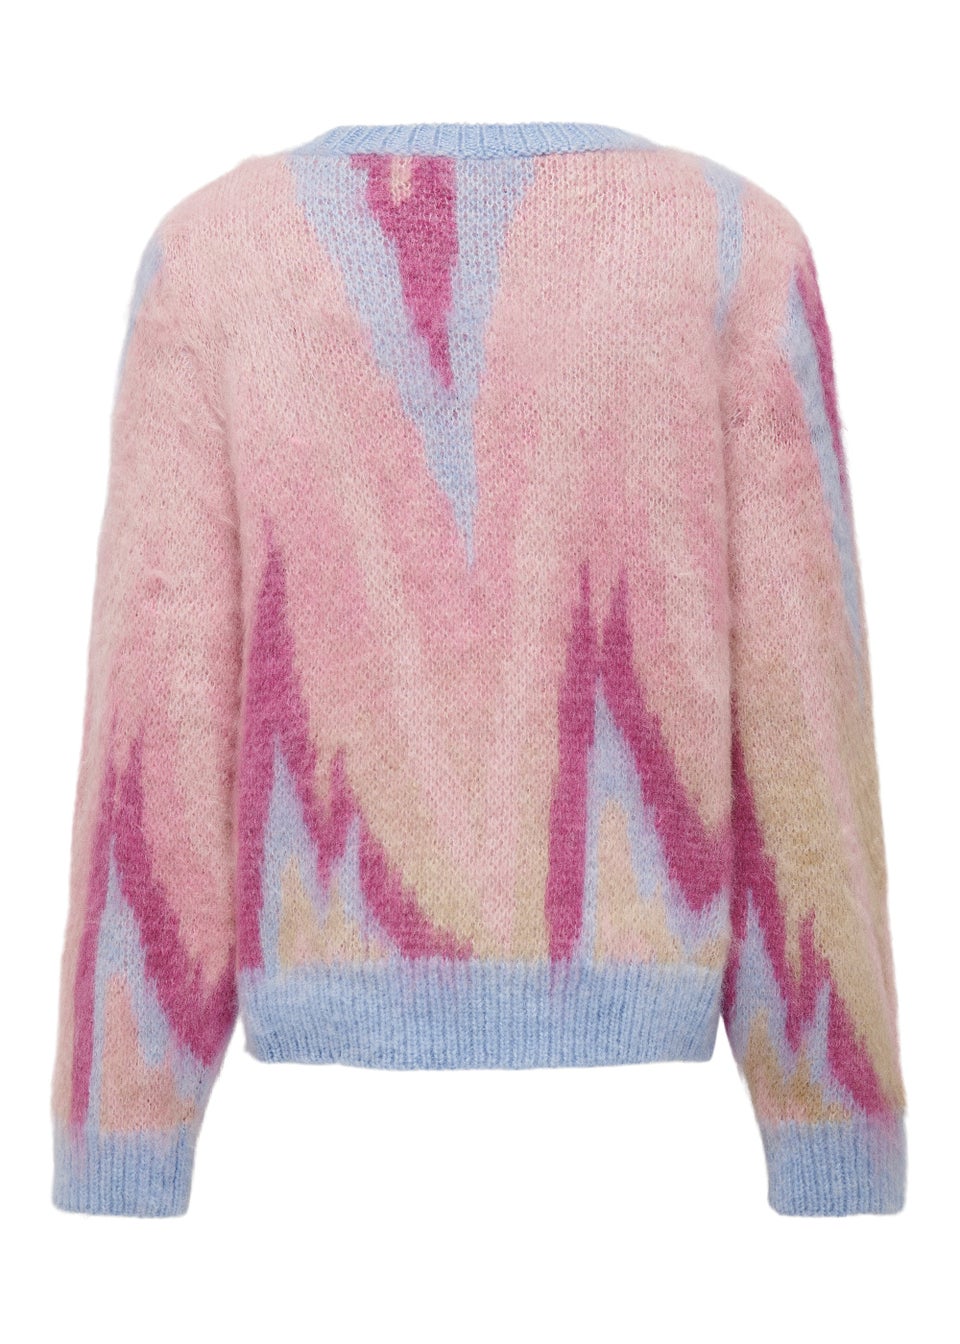 ONLY Girls Multicoloured Long Sleeve Knit Jumper (5-14yrs)